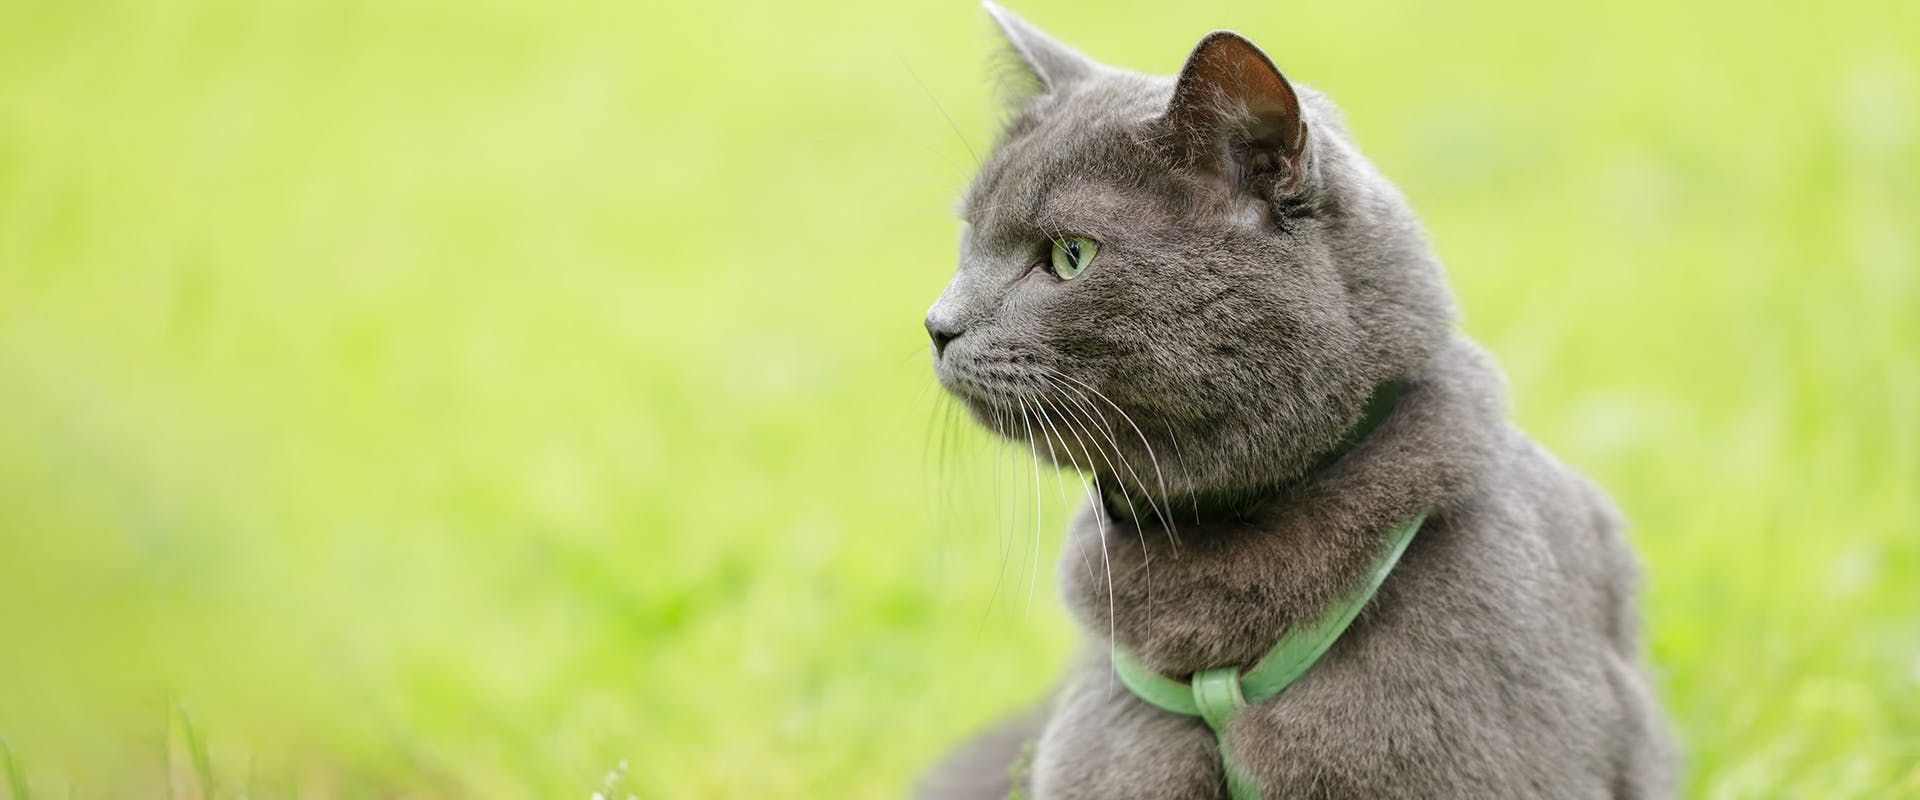 A fluffy grey cat wearing a green H-style cat harness